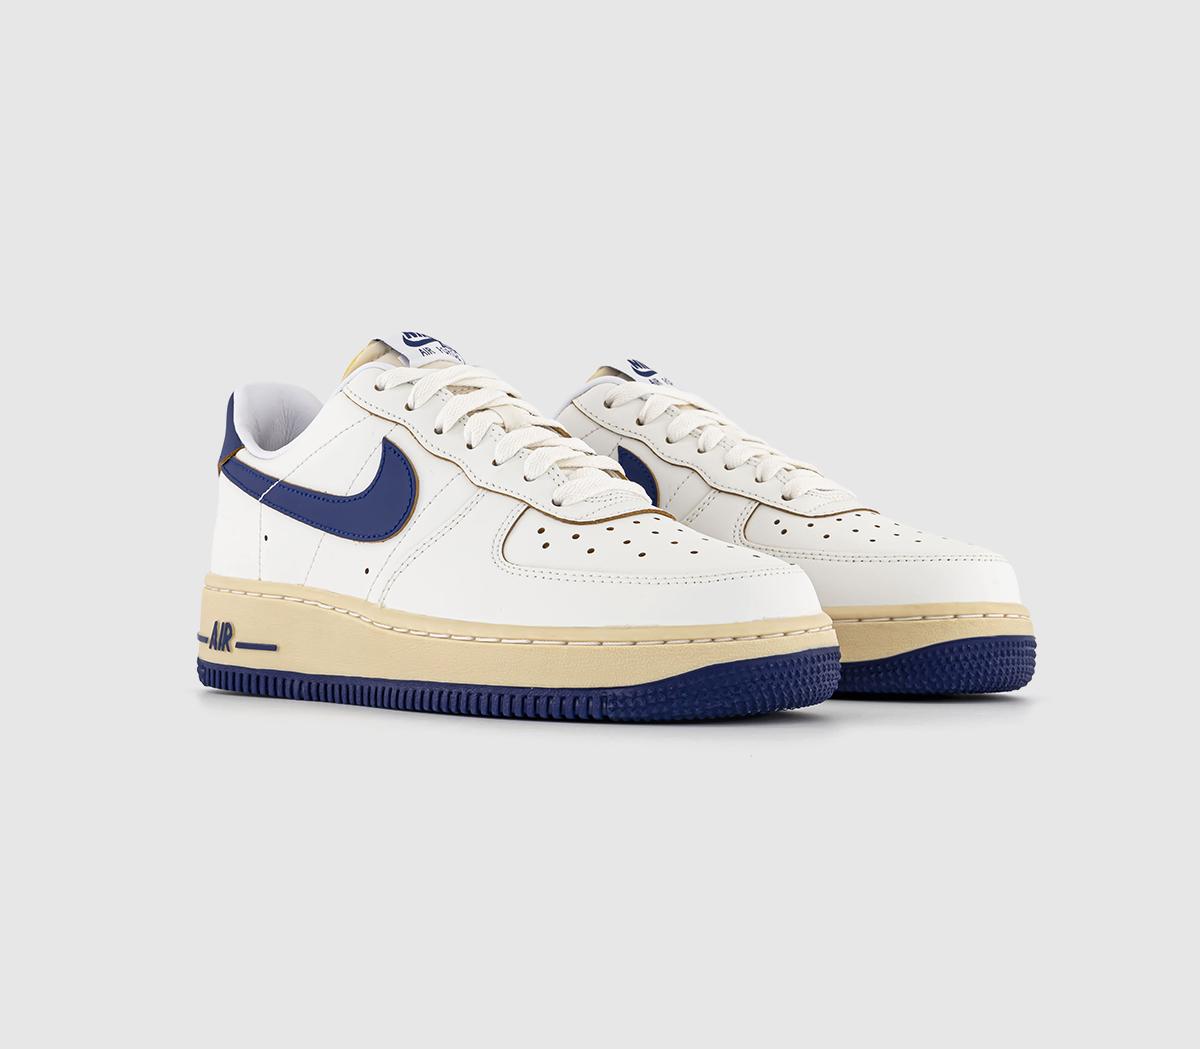 Nike Womens Air Force 1 07 Trainers Sail Deep Royal Blue Pale Vanilla Gold Suede White, 9